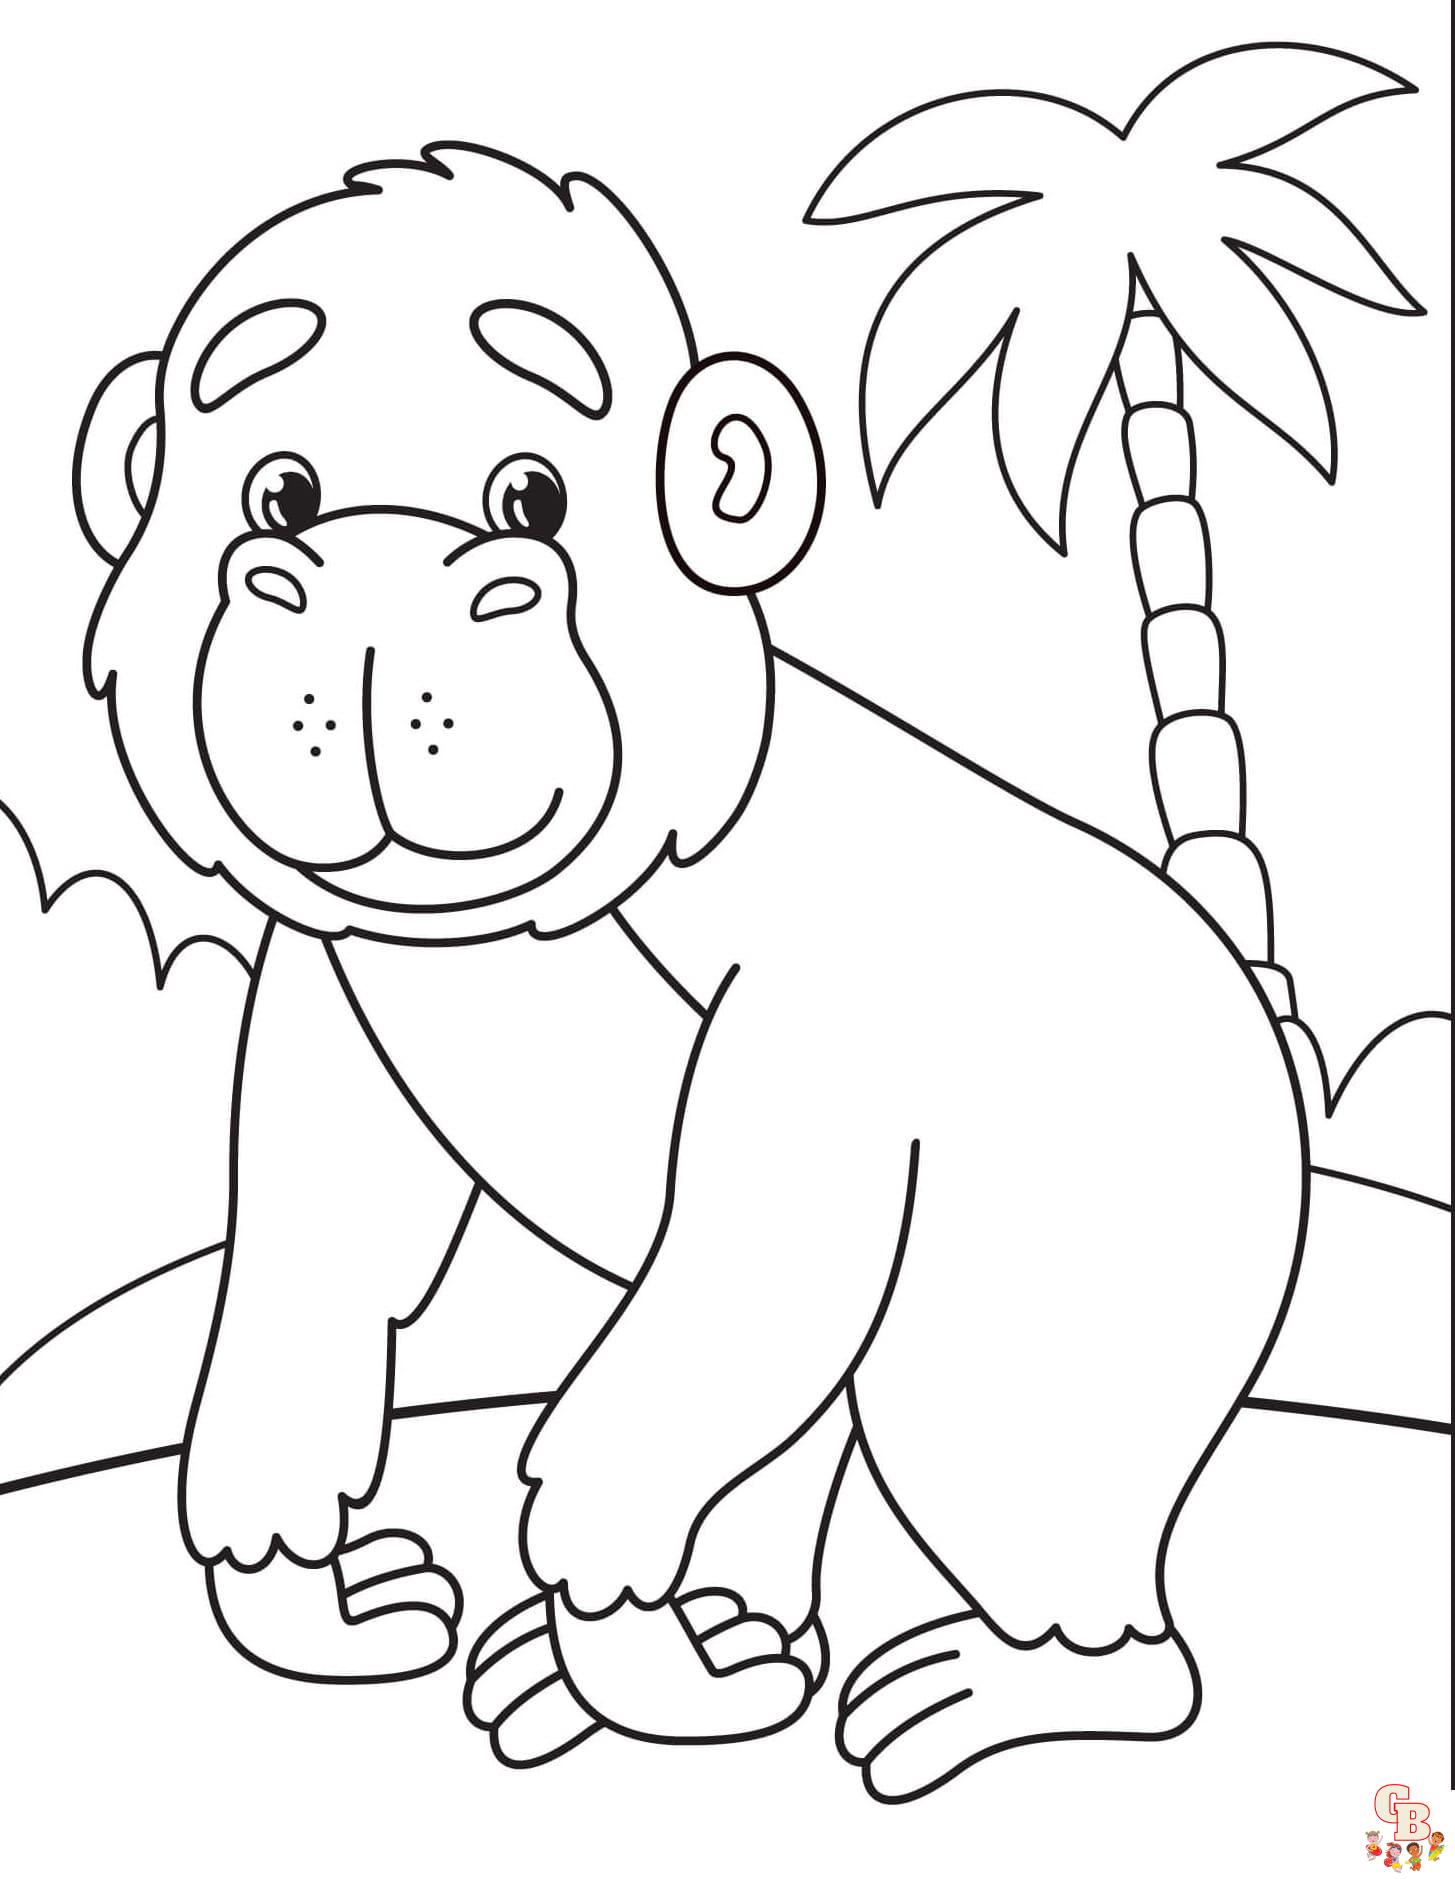 Gorillas coloring pages free